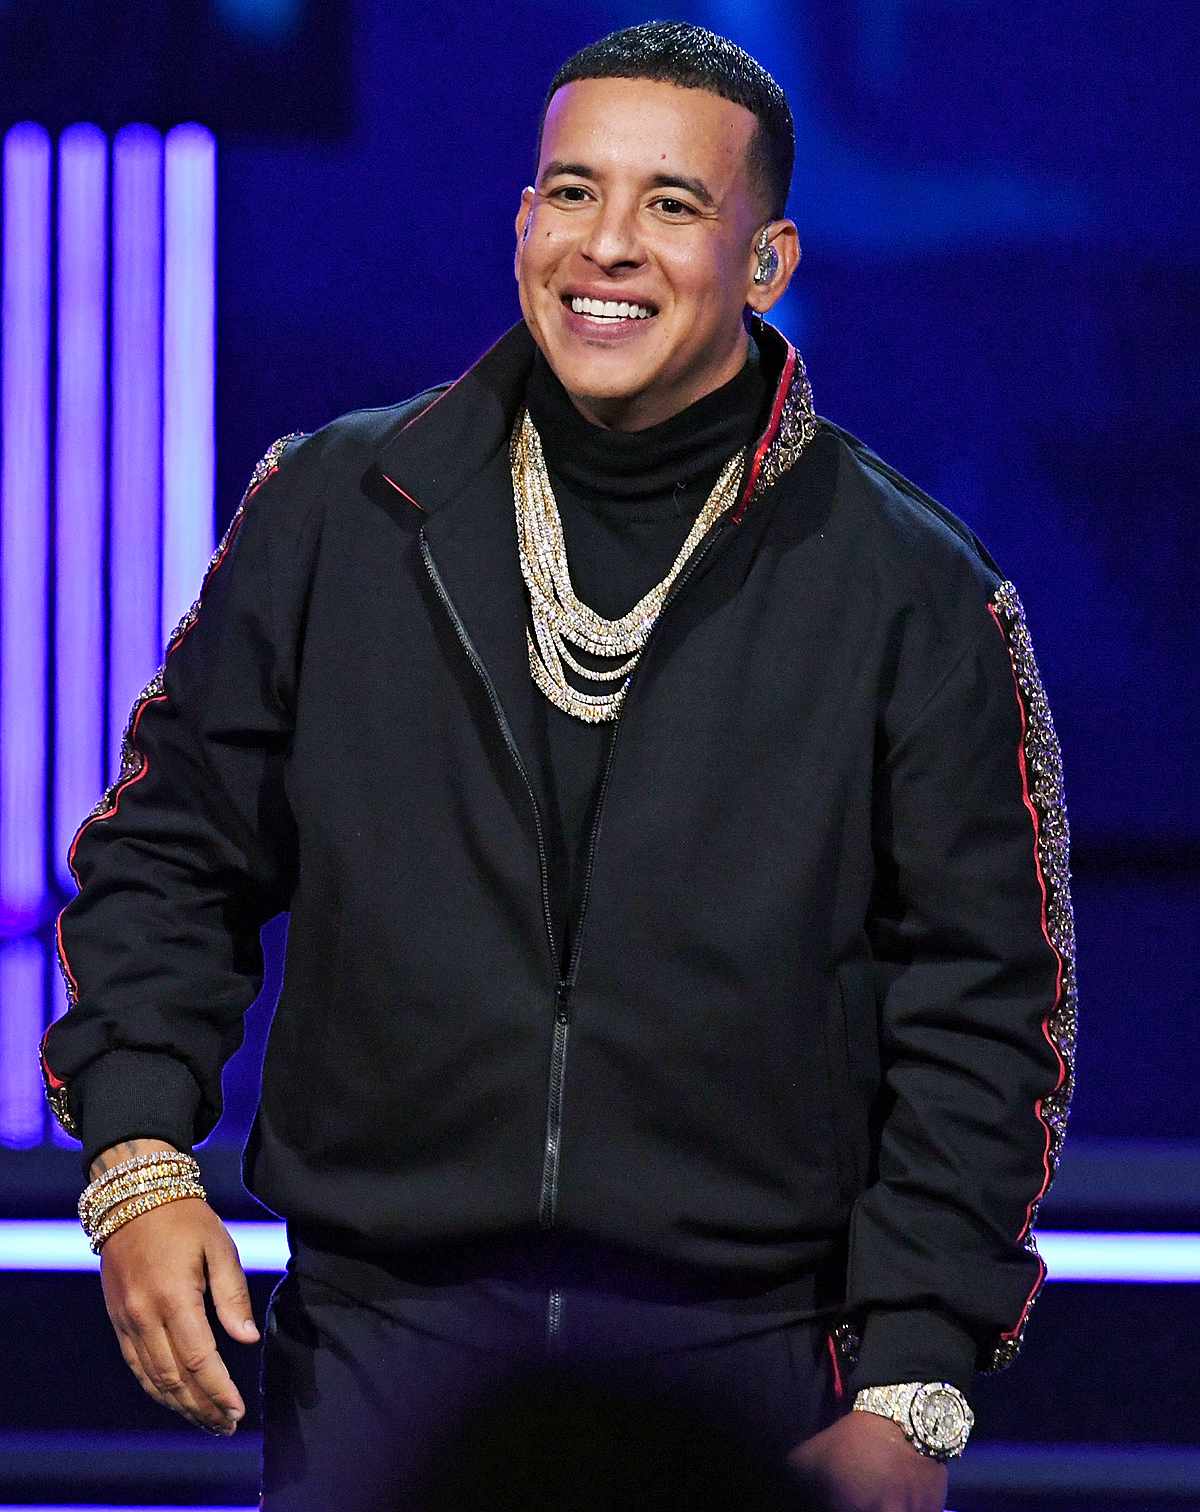 Daddy Yankee Net Worth, Age, Wife, and Despacito